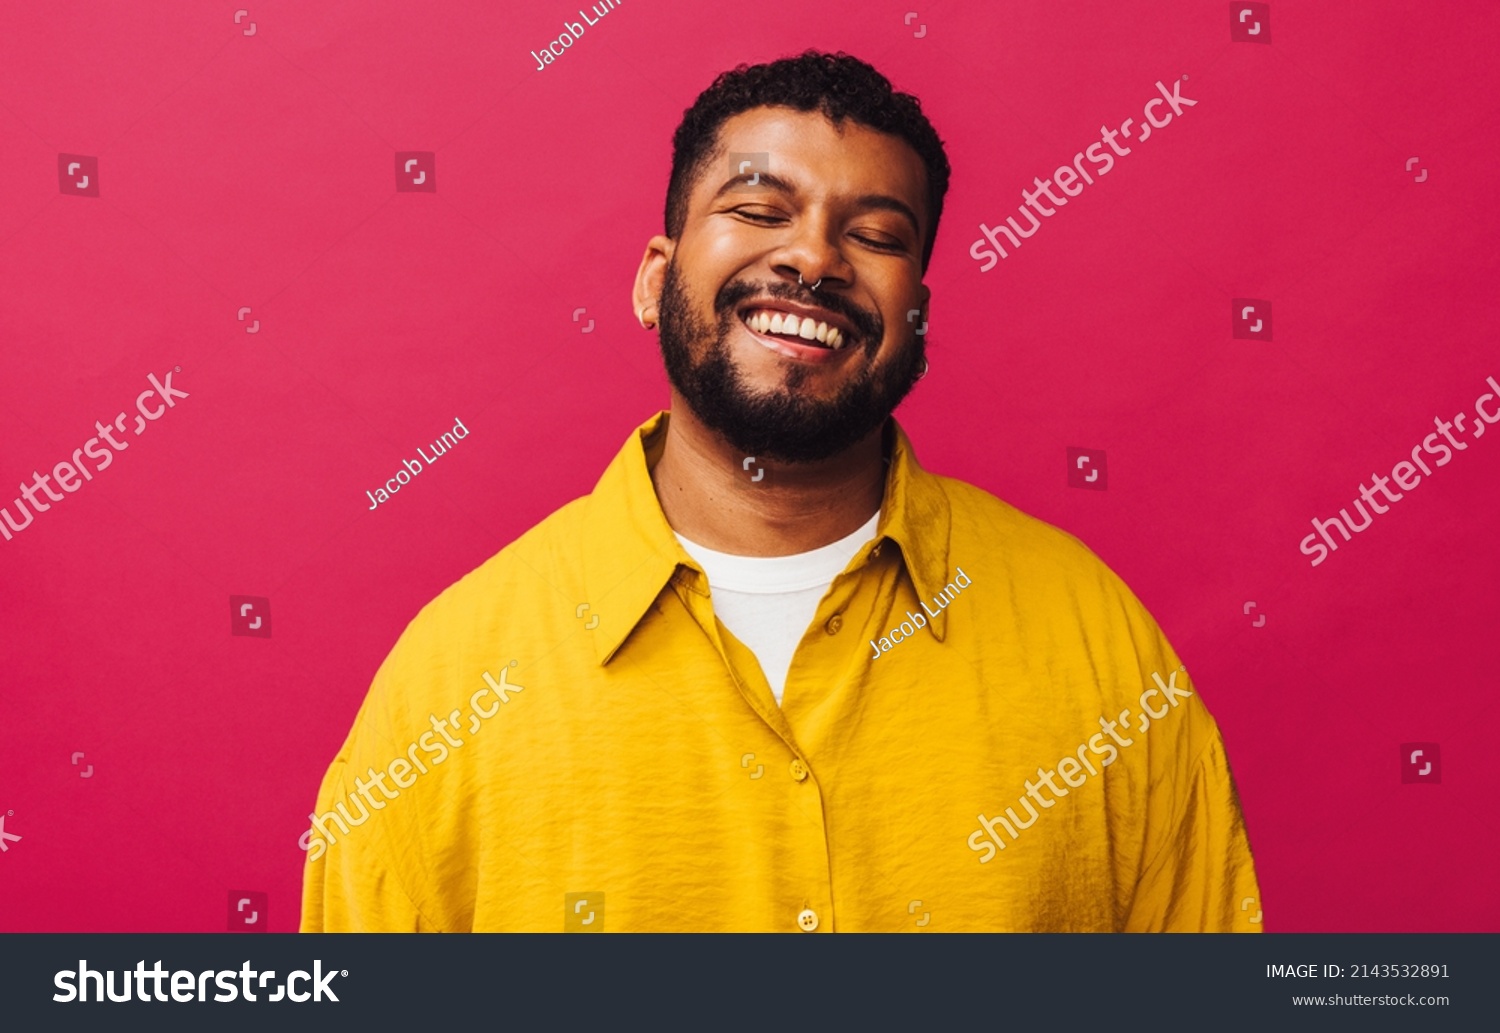 Happy young man smiling cheerfully with his eyes closed in a studio. Handsome young man with piercings standing alone against a pink background. Stylish young man feeling vibrant. #2143532891